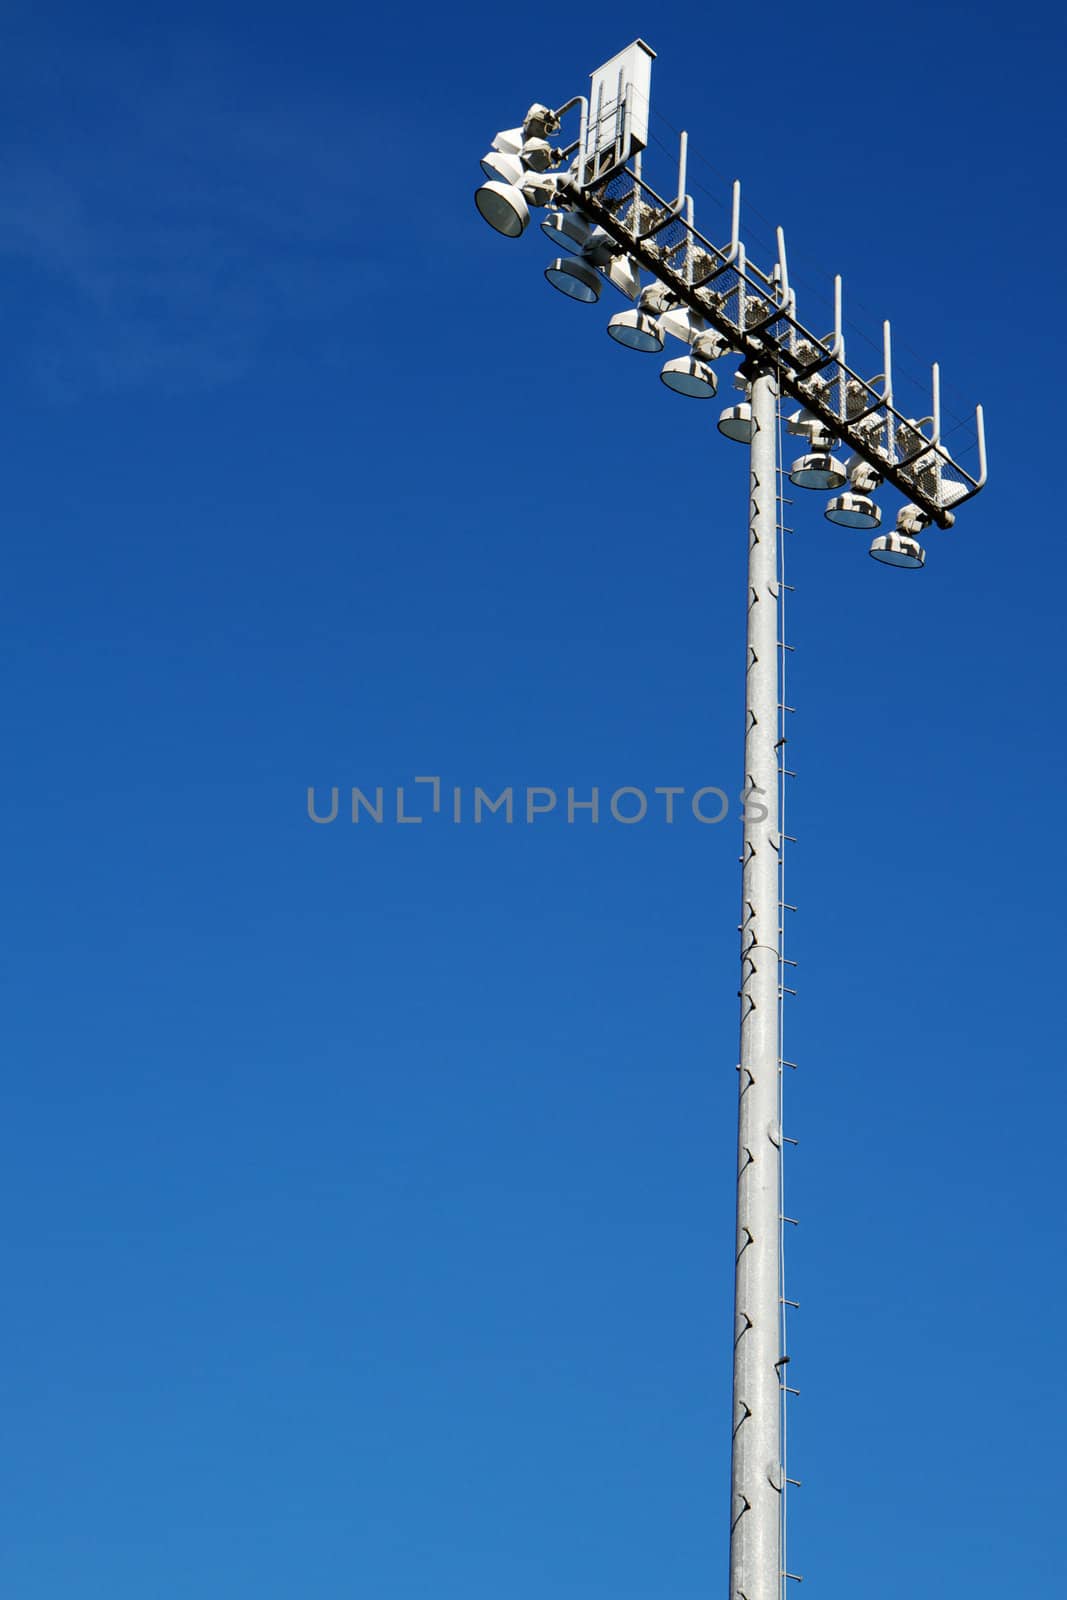 Sporting Field lights on top of tall steel pole with dark blue sky background